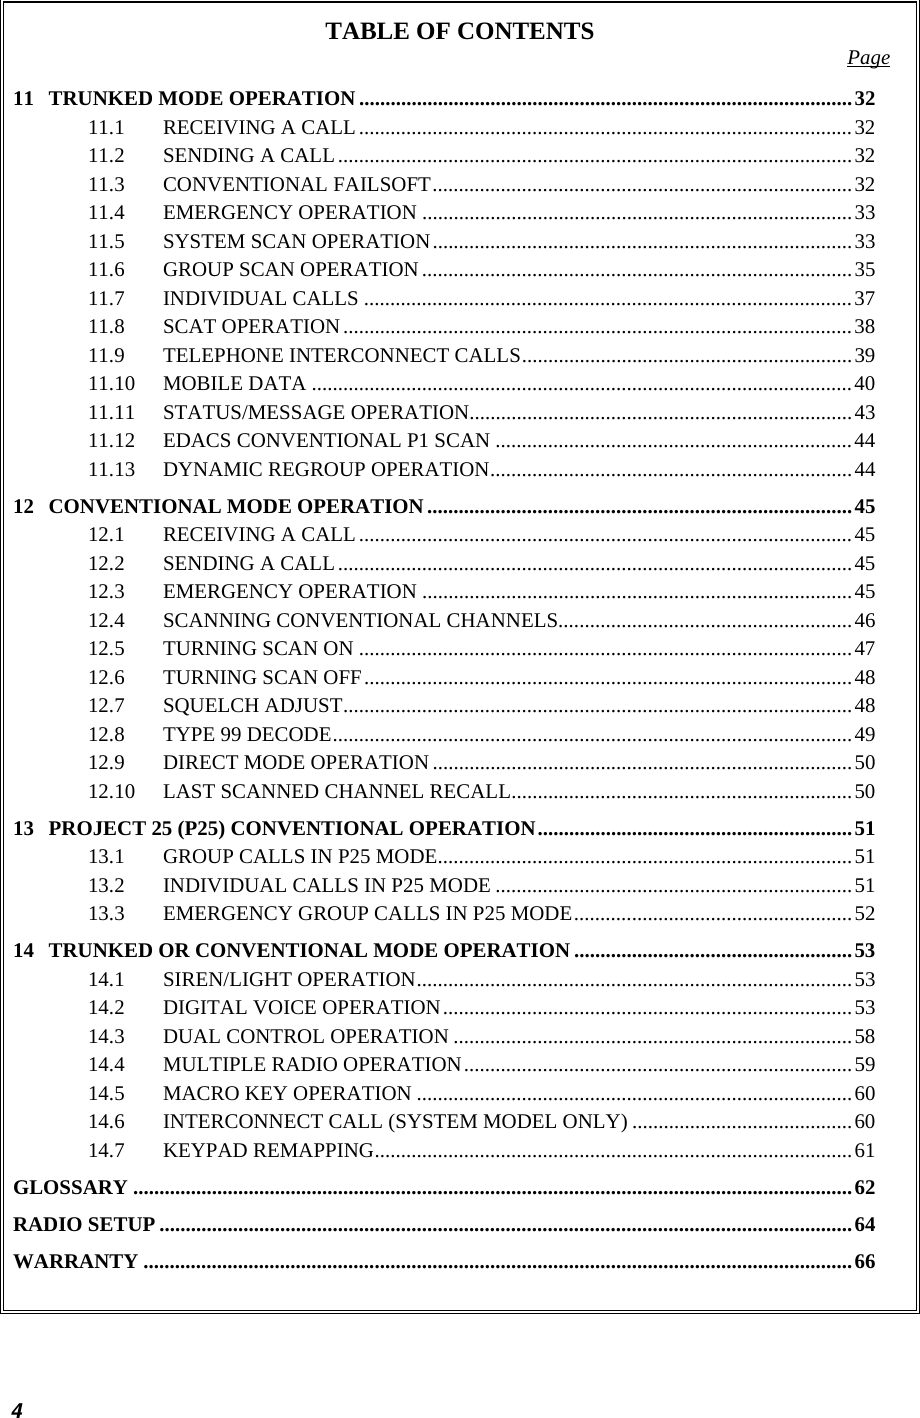  TABLE OF CONTENTS  Page 11 TRUNKED MODE OPERATION ..............................................................................................32 11.1 RECEIVING A CALL..............................................................................................32 11.2 SENDING A CALL..................................................................................................32 11.3 CONVENTIONAL FAILSOFT................................................................................32 11.4 EMERGENCY OPERATION ..................................................................................33 11.5 SYSTEM SCAN OPERATION................................................................................33 11.6 GROUP SCAN OPERATION..................................................................................35 11.7 INDIVIDUAL CALLS .............................................................................................37 11.8 SCAT OPERATION.................................................................................................38 11.9 TELEPHONE INTERCONNECT CALLS...............................................................39 11.10 MOBILE DATA .......................................................................................................40 11.11 STATUS/MESSAGE OPERATION.........................................................................43 11.12 EDACS CONVENTIONAL P1 SCAN ....................................................................44 11.13 DYNAMIC REGROUP OPERATION.....................................................................44 12 CONVENTIONAL MODE OPERATION.................................................................................45 12.1 RECEIVING A CALL..............................................................................................45 12.2 SENDING A CALL..................................................................................................45 12.3 EMERGENCY OPERATION ..................................................................................45 12.4 SCANNING CONVENTIONAL CHANNELS........................................................46 12.5 TURNING SCAN ON ..............................................................................................47 12.6 TURNING SCAN OFF.............................................................................................48 12.7 SQUELCH ADJUST.................................................................................................48 12.8 TYPE 99 DECODE...................................................................................................49 12.9 DIRECT MODE OPERATION ................................................................................50 12.10 LAST SCANNED CHANNEL RECALL.................................................................50 13 PROJECT 25 (P25) CONVENTIONAL OPERATION............................................................51 13.1 GROUP CALLS IN P25 MODE...............................................................................51 13.2 INDIVIDUAL CALLS IN P25 MODE ....................................................................51 13.3 EMERGENCY GROUP CALLS IN P25 MODE.....................................................52 14 TRUNKED OR CONVENTIONAL MODE OPERATION .....................................................53 14.1 SIREN/LIGHT OPERATION...................................................................................53 14.2 DIGITAL VOICE OPERATION..............................................................................53 14.3 DUAL CONTROL OPERATION ............................................................................58 14.4 MULTIPLE RADIO OPERATION..........................................................................59 14.5 MACRO KEY OPERATION ...................................................................................60 14.6 INTERCONNECT CALL (SYSTEM MODEL ONLY) ..........................................60 14.7 KEYPAD REMAPPING...........................................................................................61 GLOSSARY .........................................................................................................................................62 RADIO SETUP ....................................................................................................................................64 WARRANTY .......................................................................................................................................66  4 